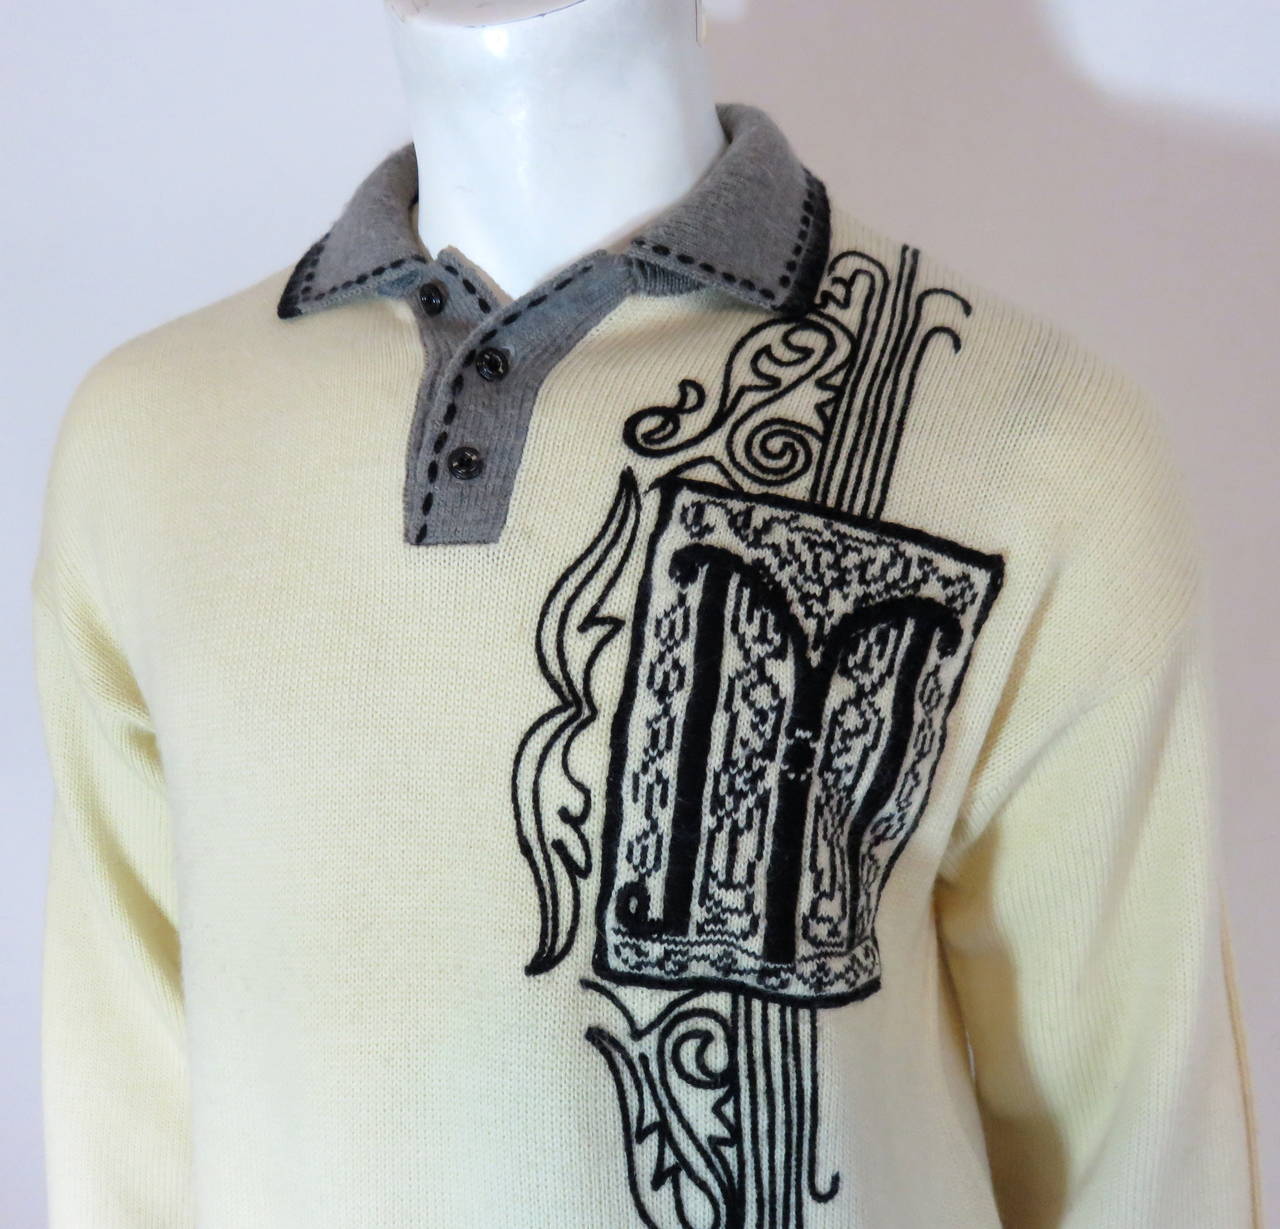 Excellent condition, 1980's MATSUDA JAPAN Men's M. Nicole 'Letterman' sweater.

Light creme/ivory, wool knit fabrication with cross-grain, gray bottom border and cuff edges.

Contrast, black, 1930's inspired motifs at the left chest with framed,